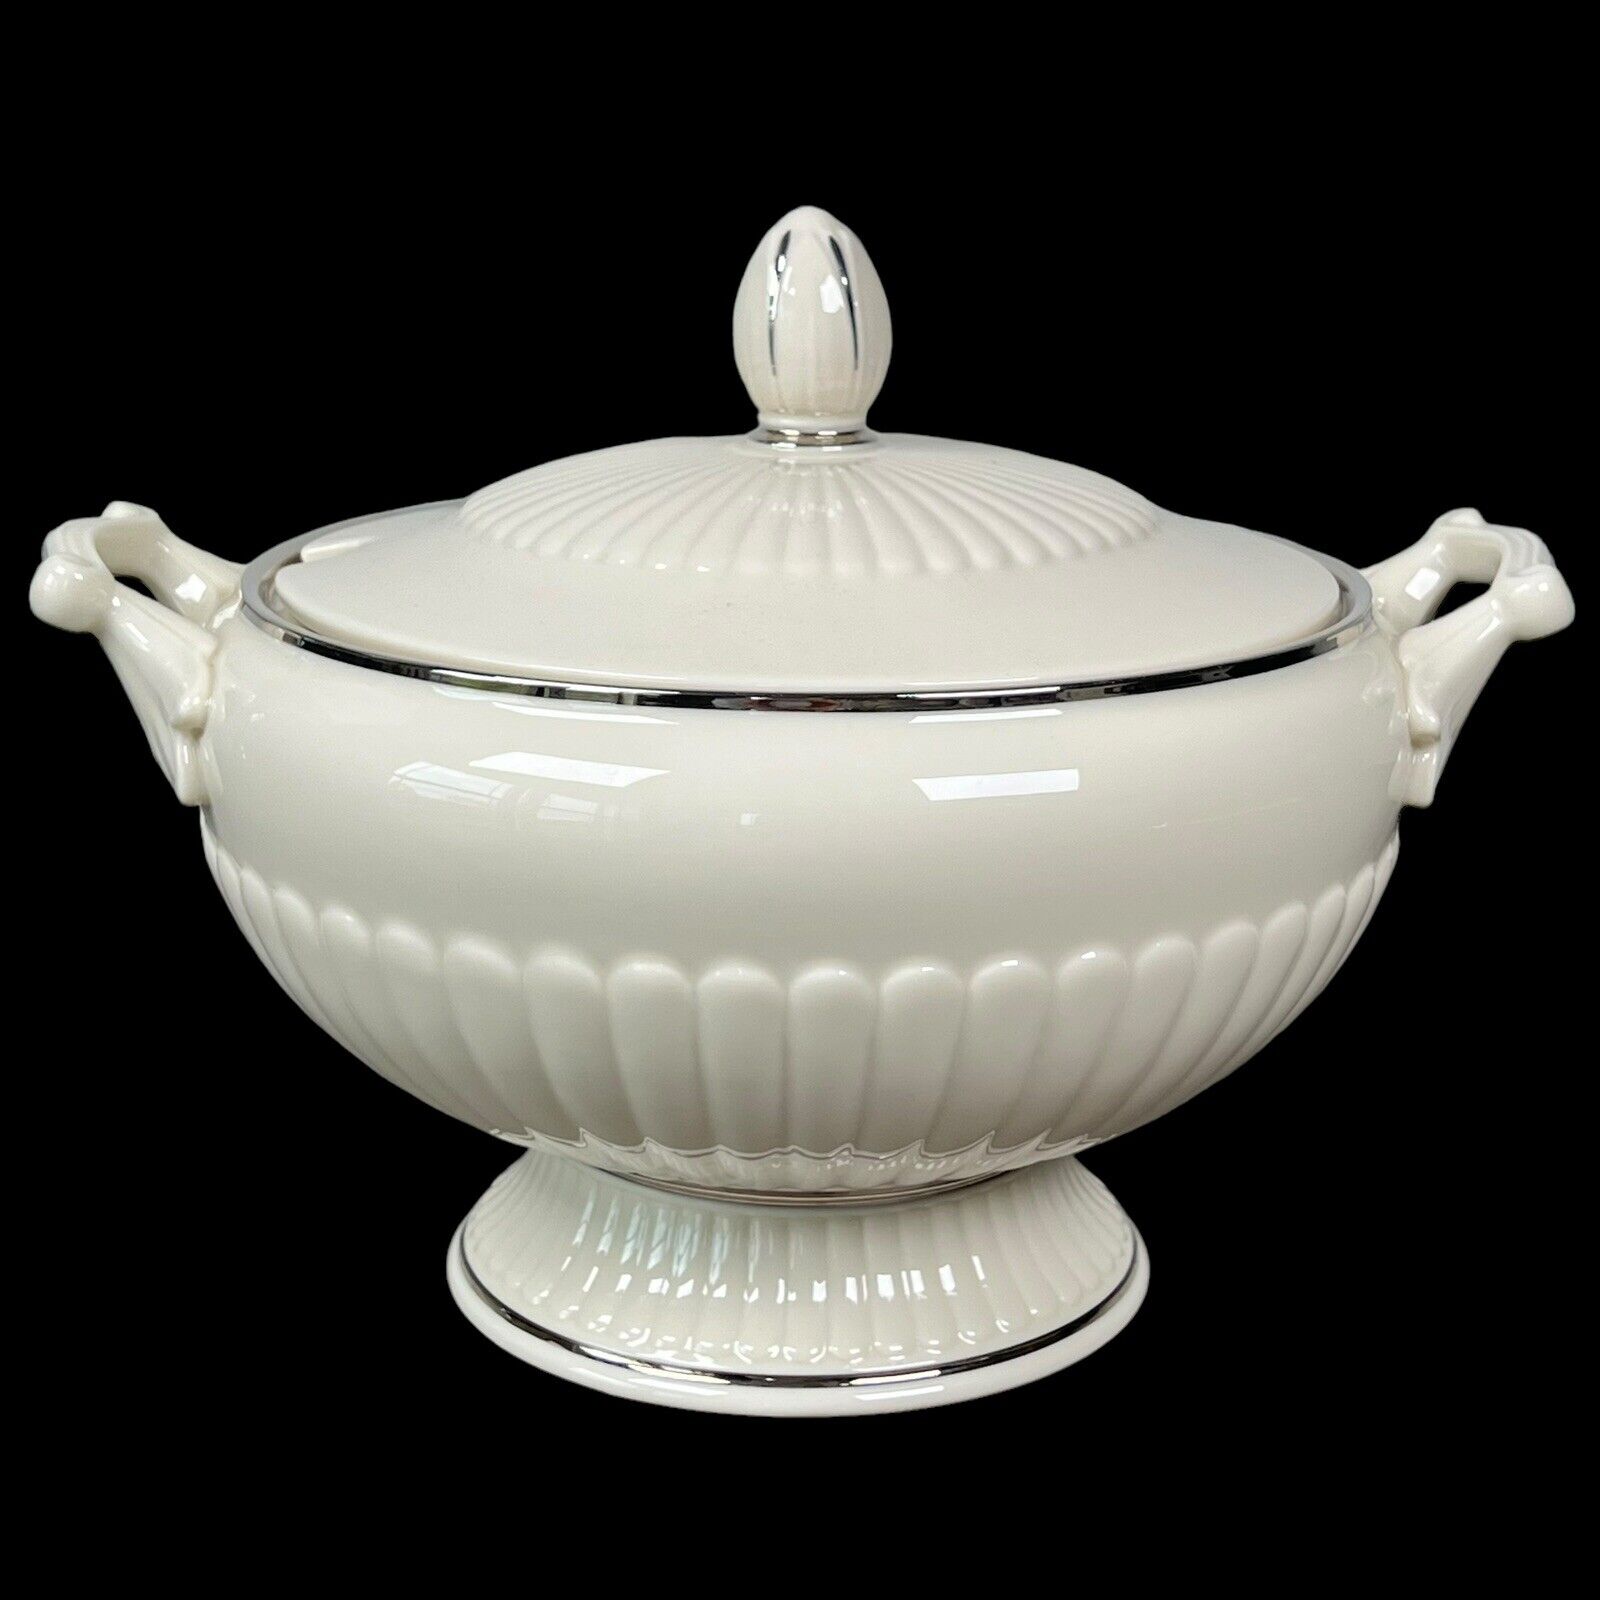 Lenox China Georgian Soup Tureen With Lid Platinum Trim Great Condition